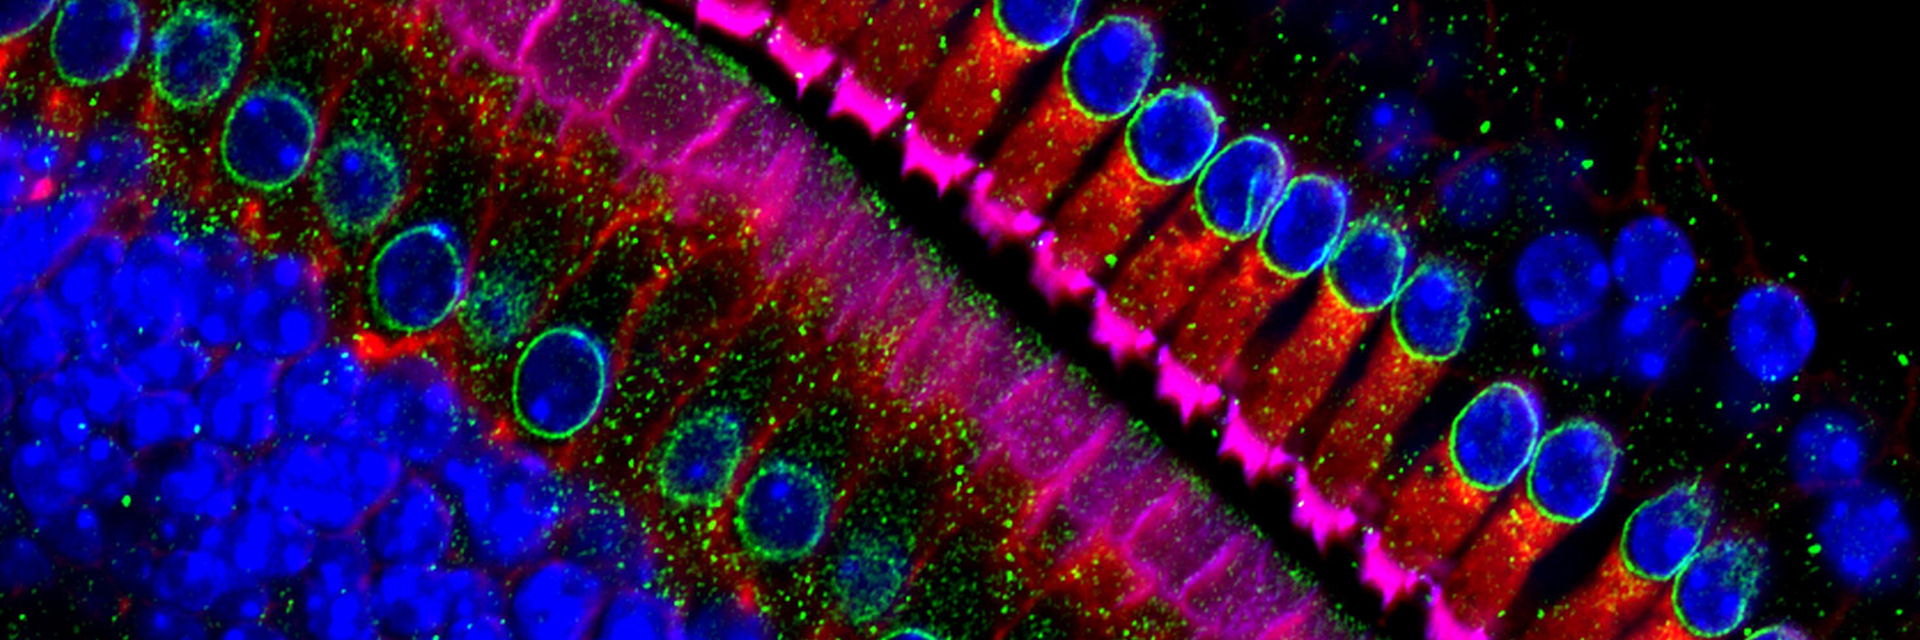 colorized micrograph of hair cells within an ear